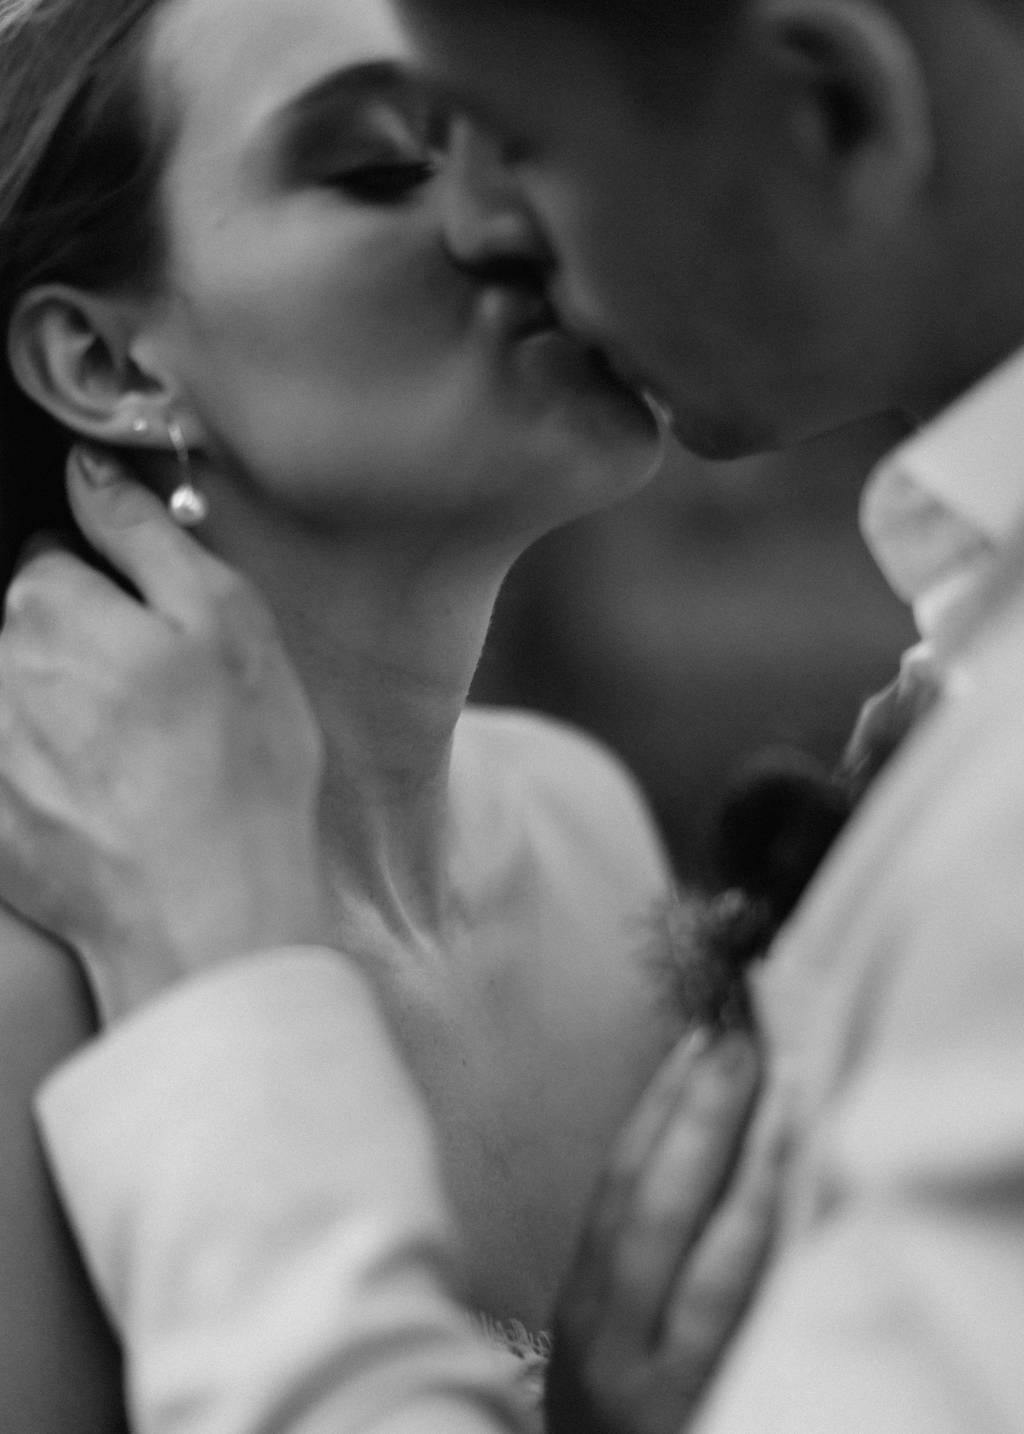 Black and white close-up photo of a couple sharing a tender kiss. The woman, wearing a strapless top and drop earrings, is gently holding the man's neck. The man, in a buttoned-up shirt, has his arm wrapped around her shoulder.